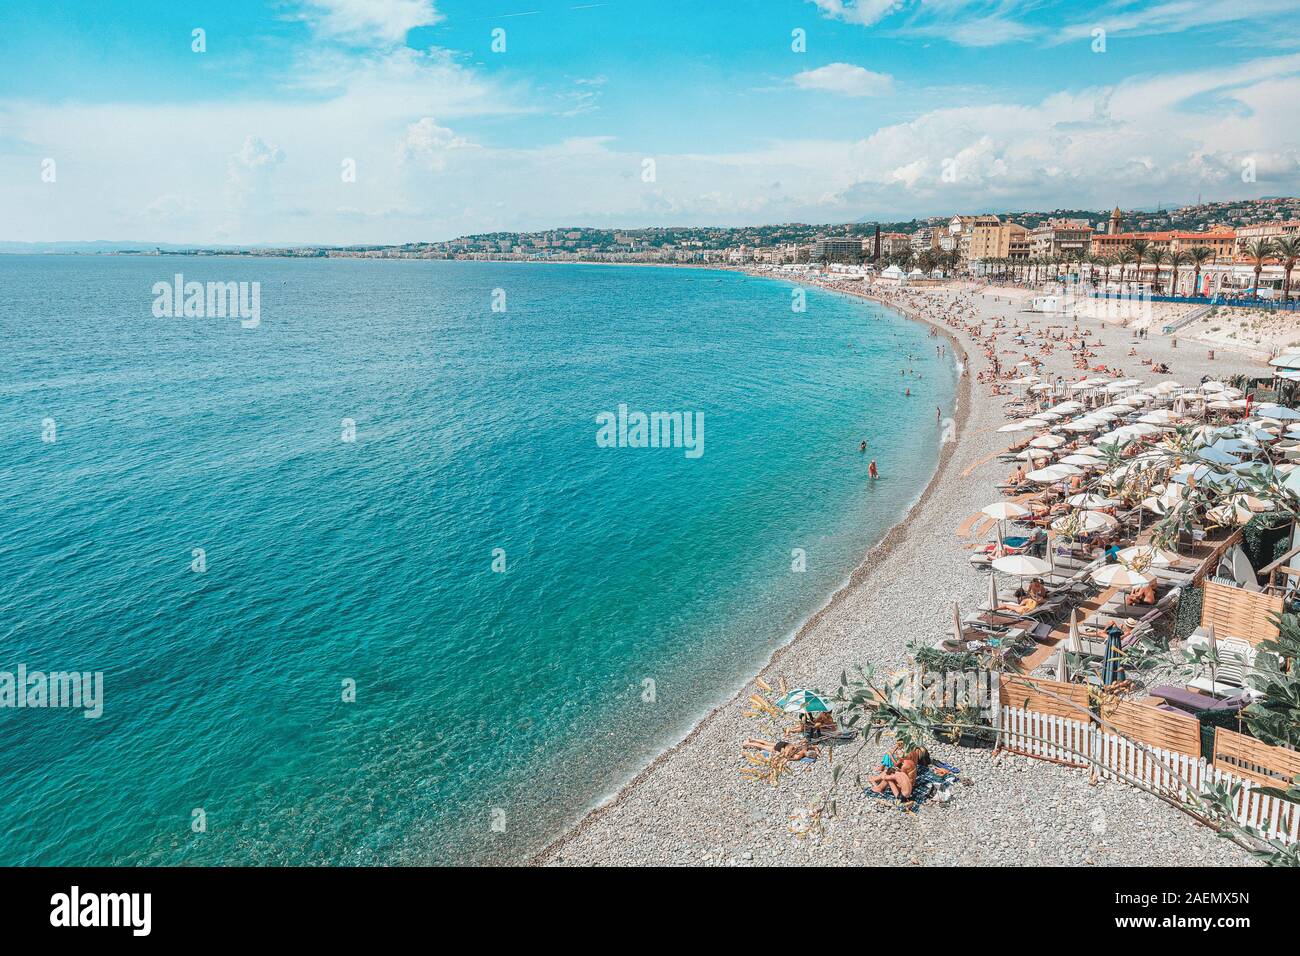 Nice, France, September 6, 2018: The public baths Plage de Castel and Plage des Ponchettes in the French city of Nice Stock Photo